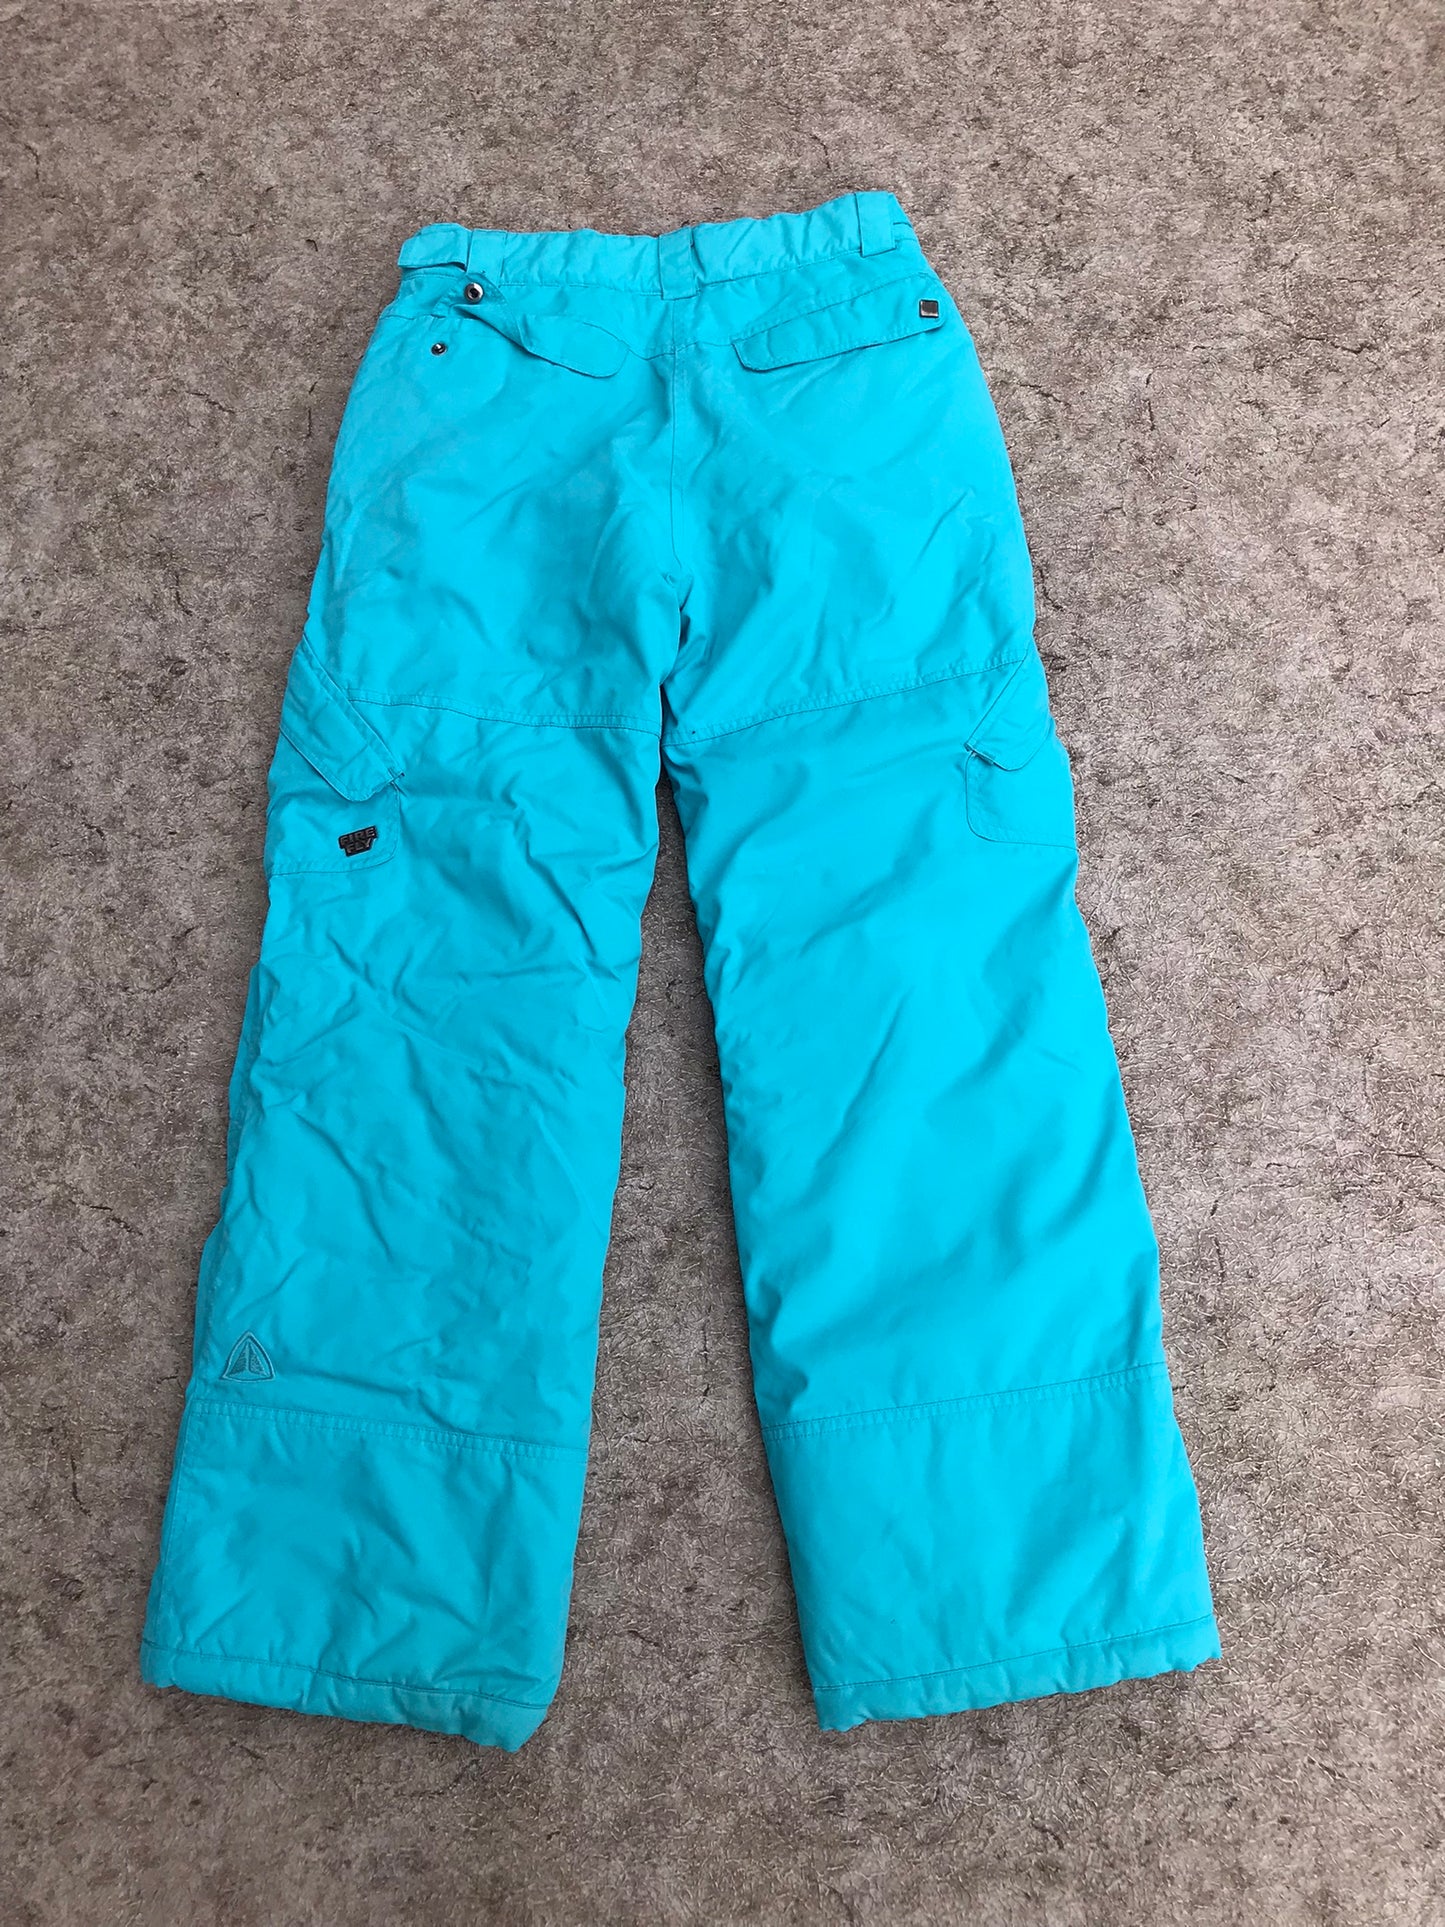 Snow Pants Child Size 16 Youth Firefly Aqua Blue Outstanding Quality